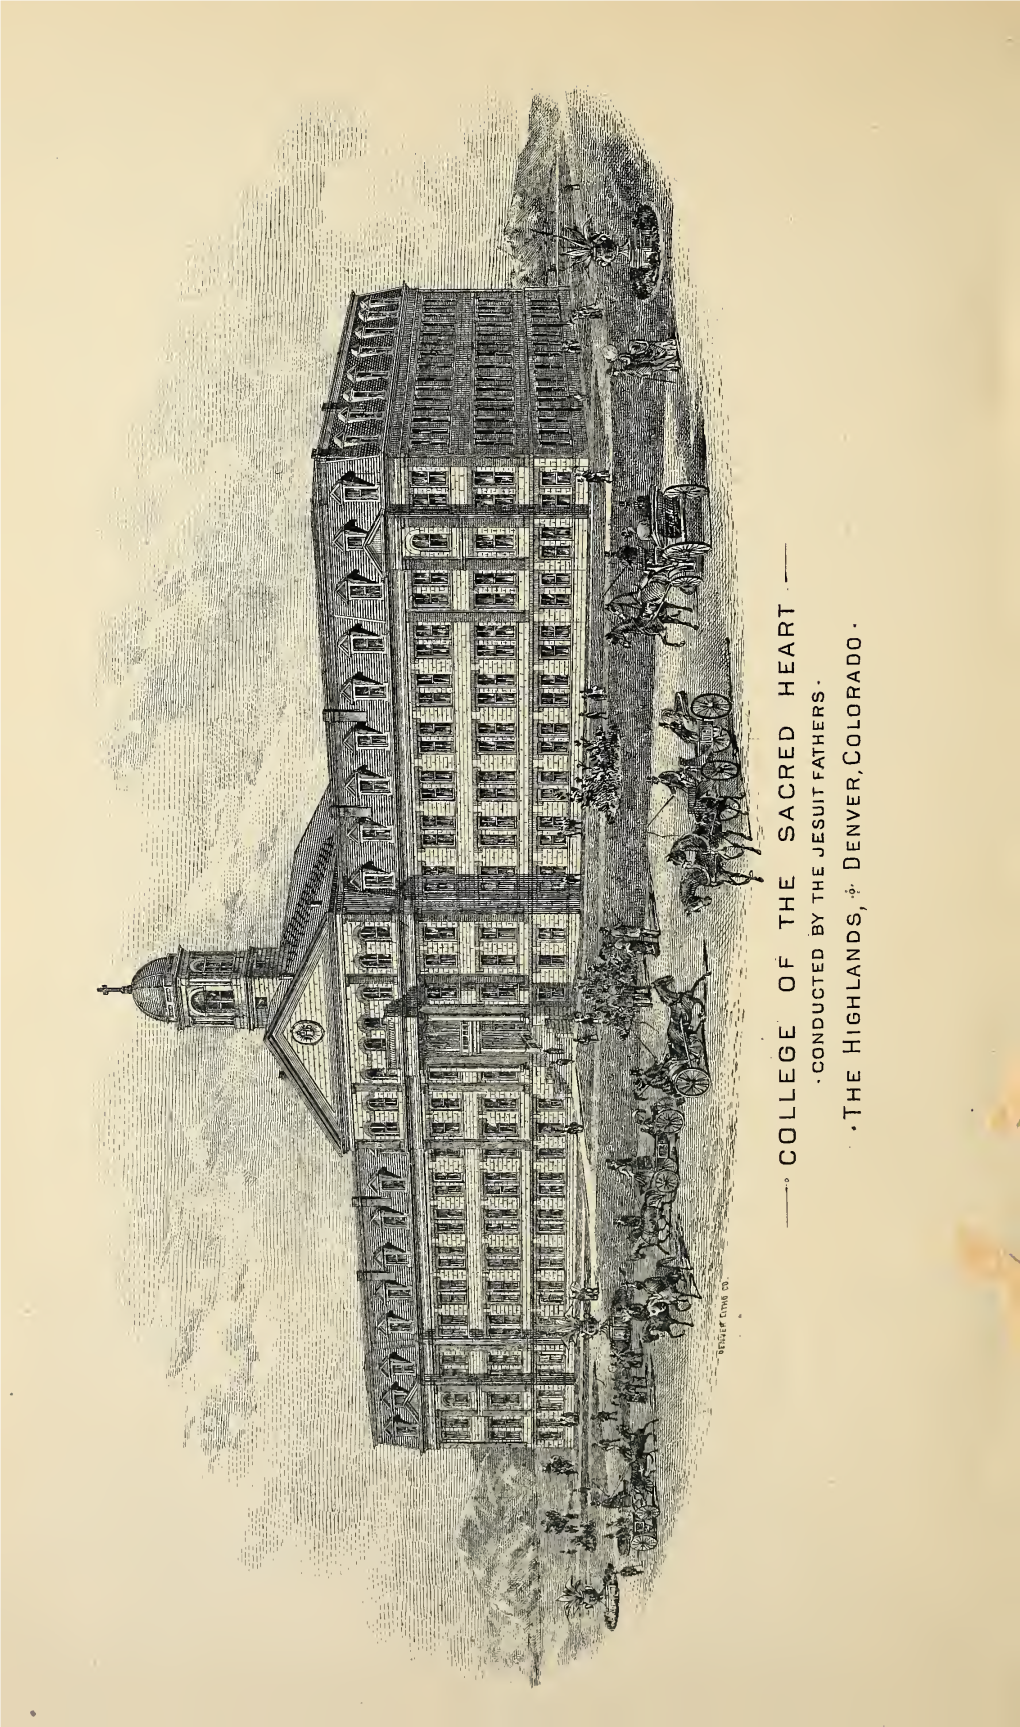 A.M.D.G. Catalogue of the College of the Sacred Heart(Title Page Missing)